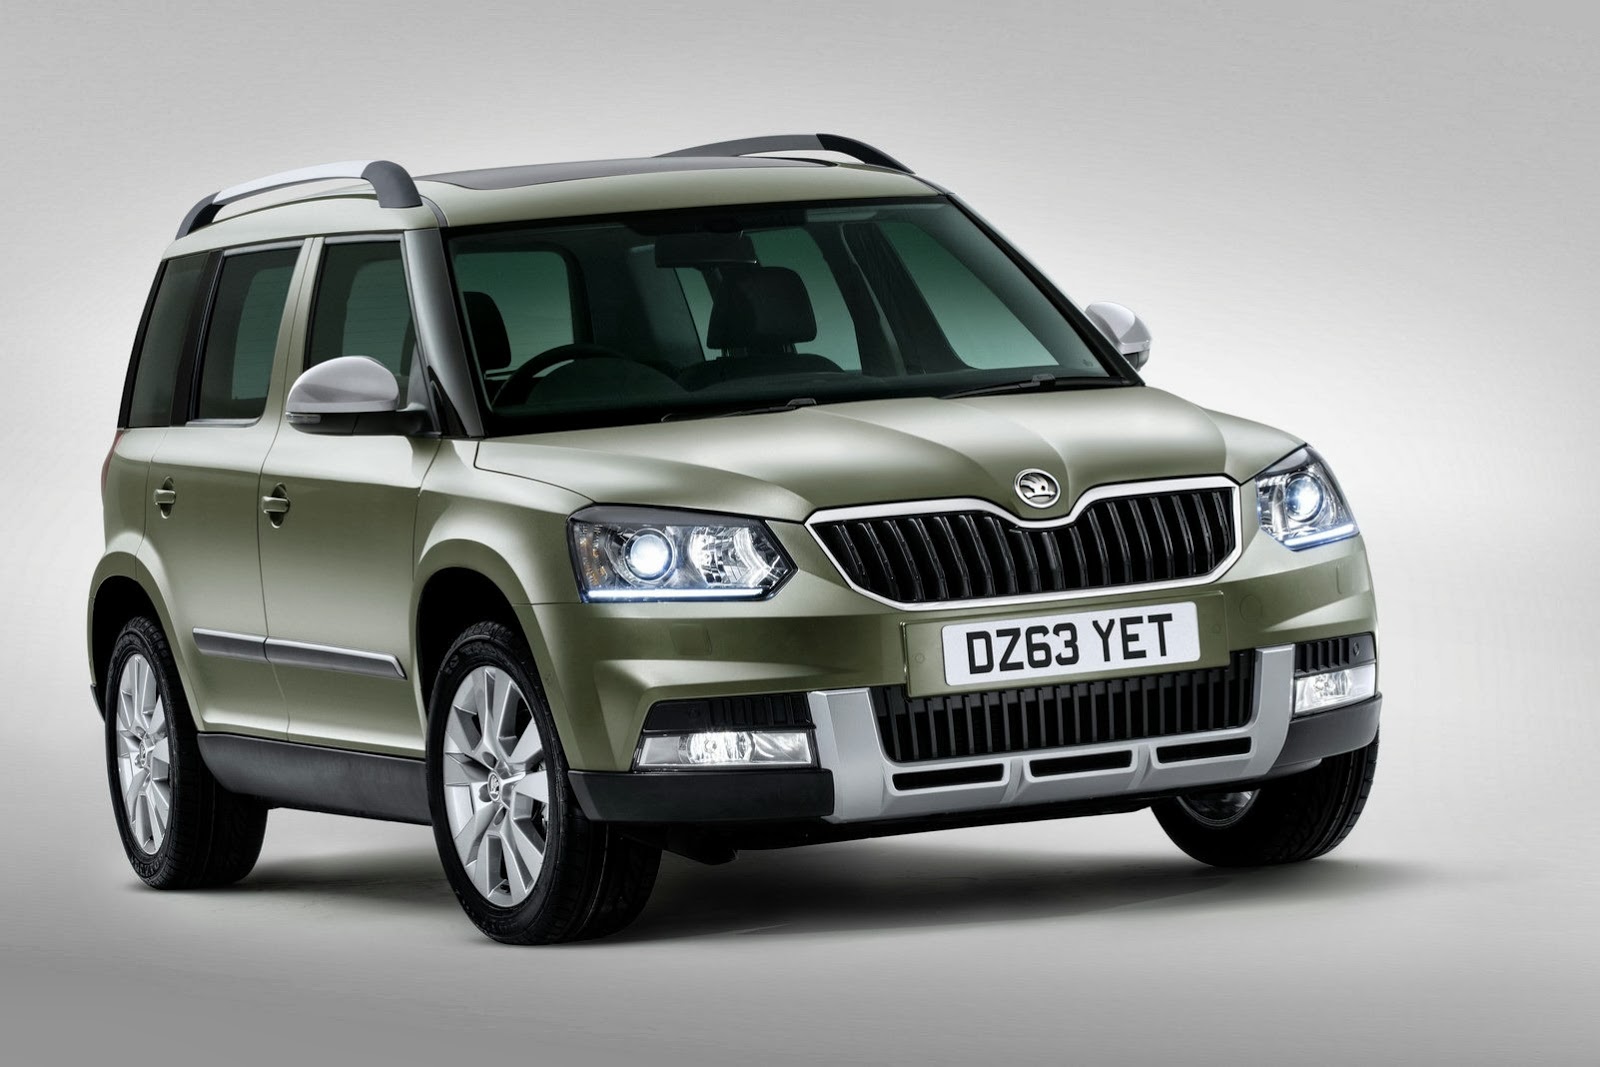 Dack Motor Group - The Skoda Yeti is the ultimate family car with